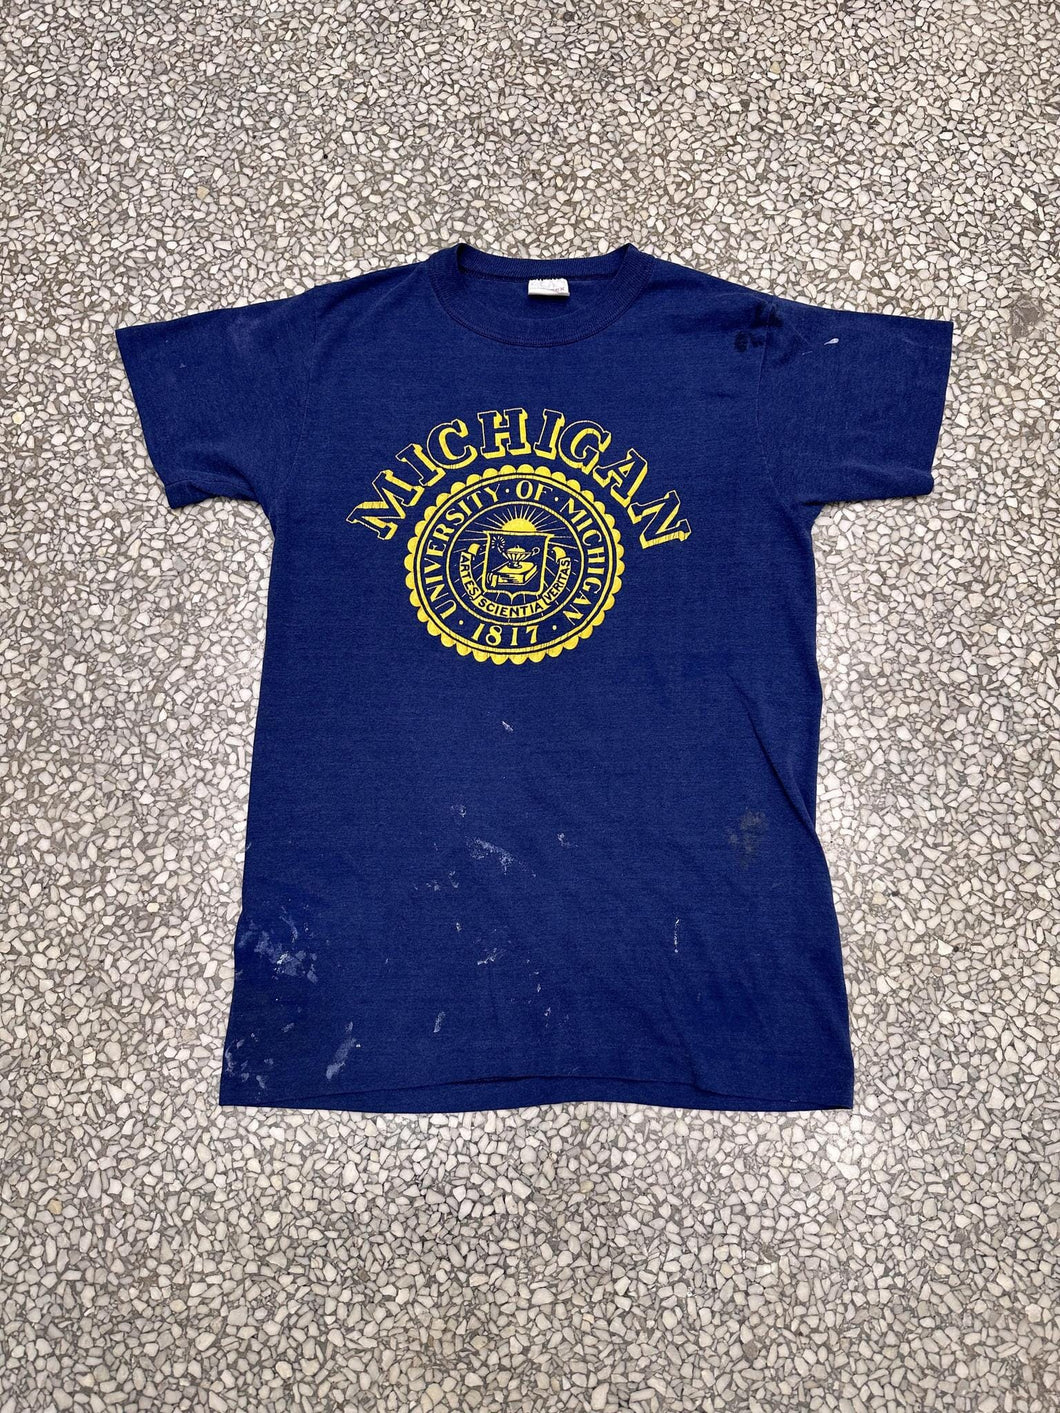 Michigan Wolverines Vintage 70s Crest Paper Thin Faded Navy ABC Vintage 